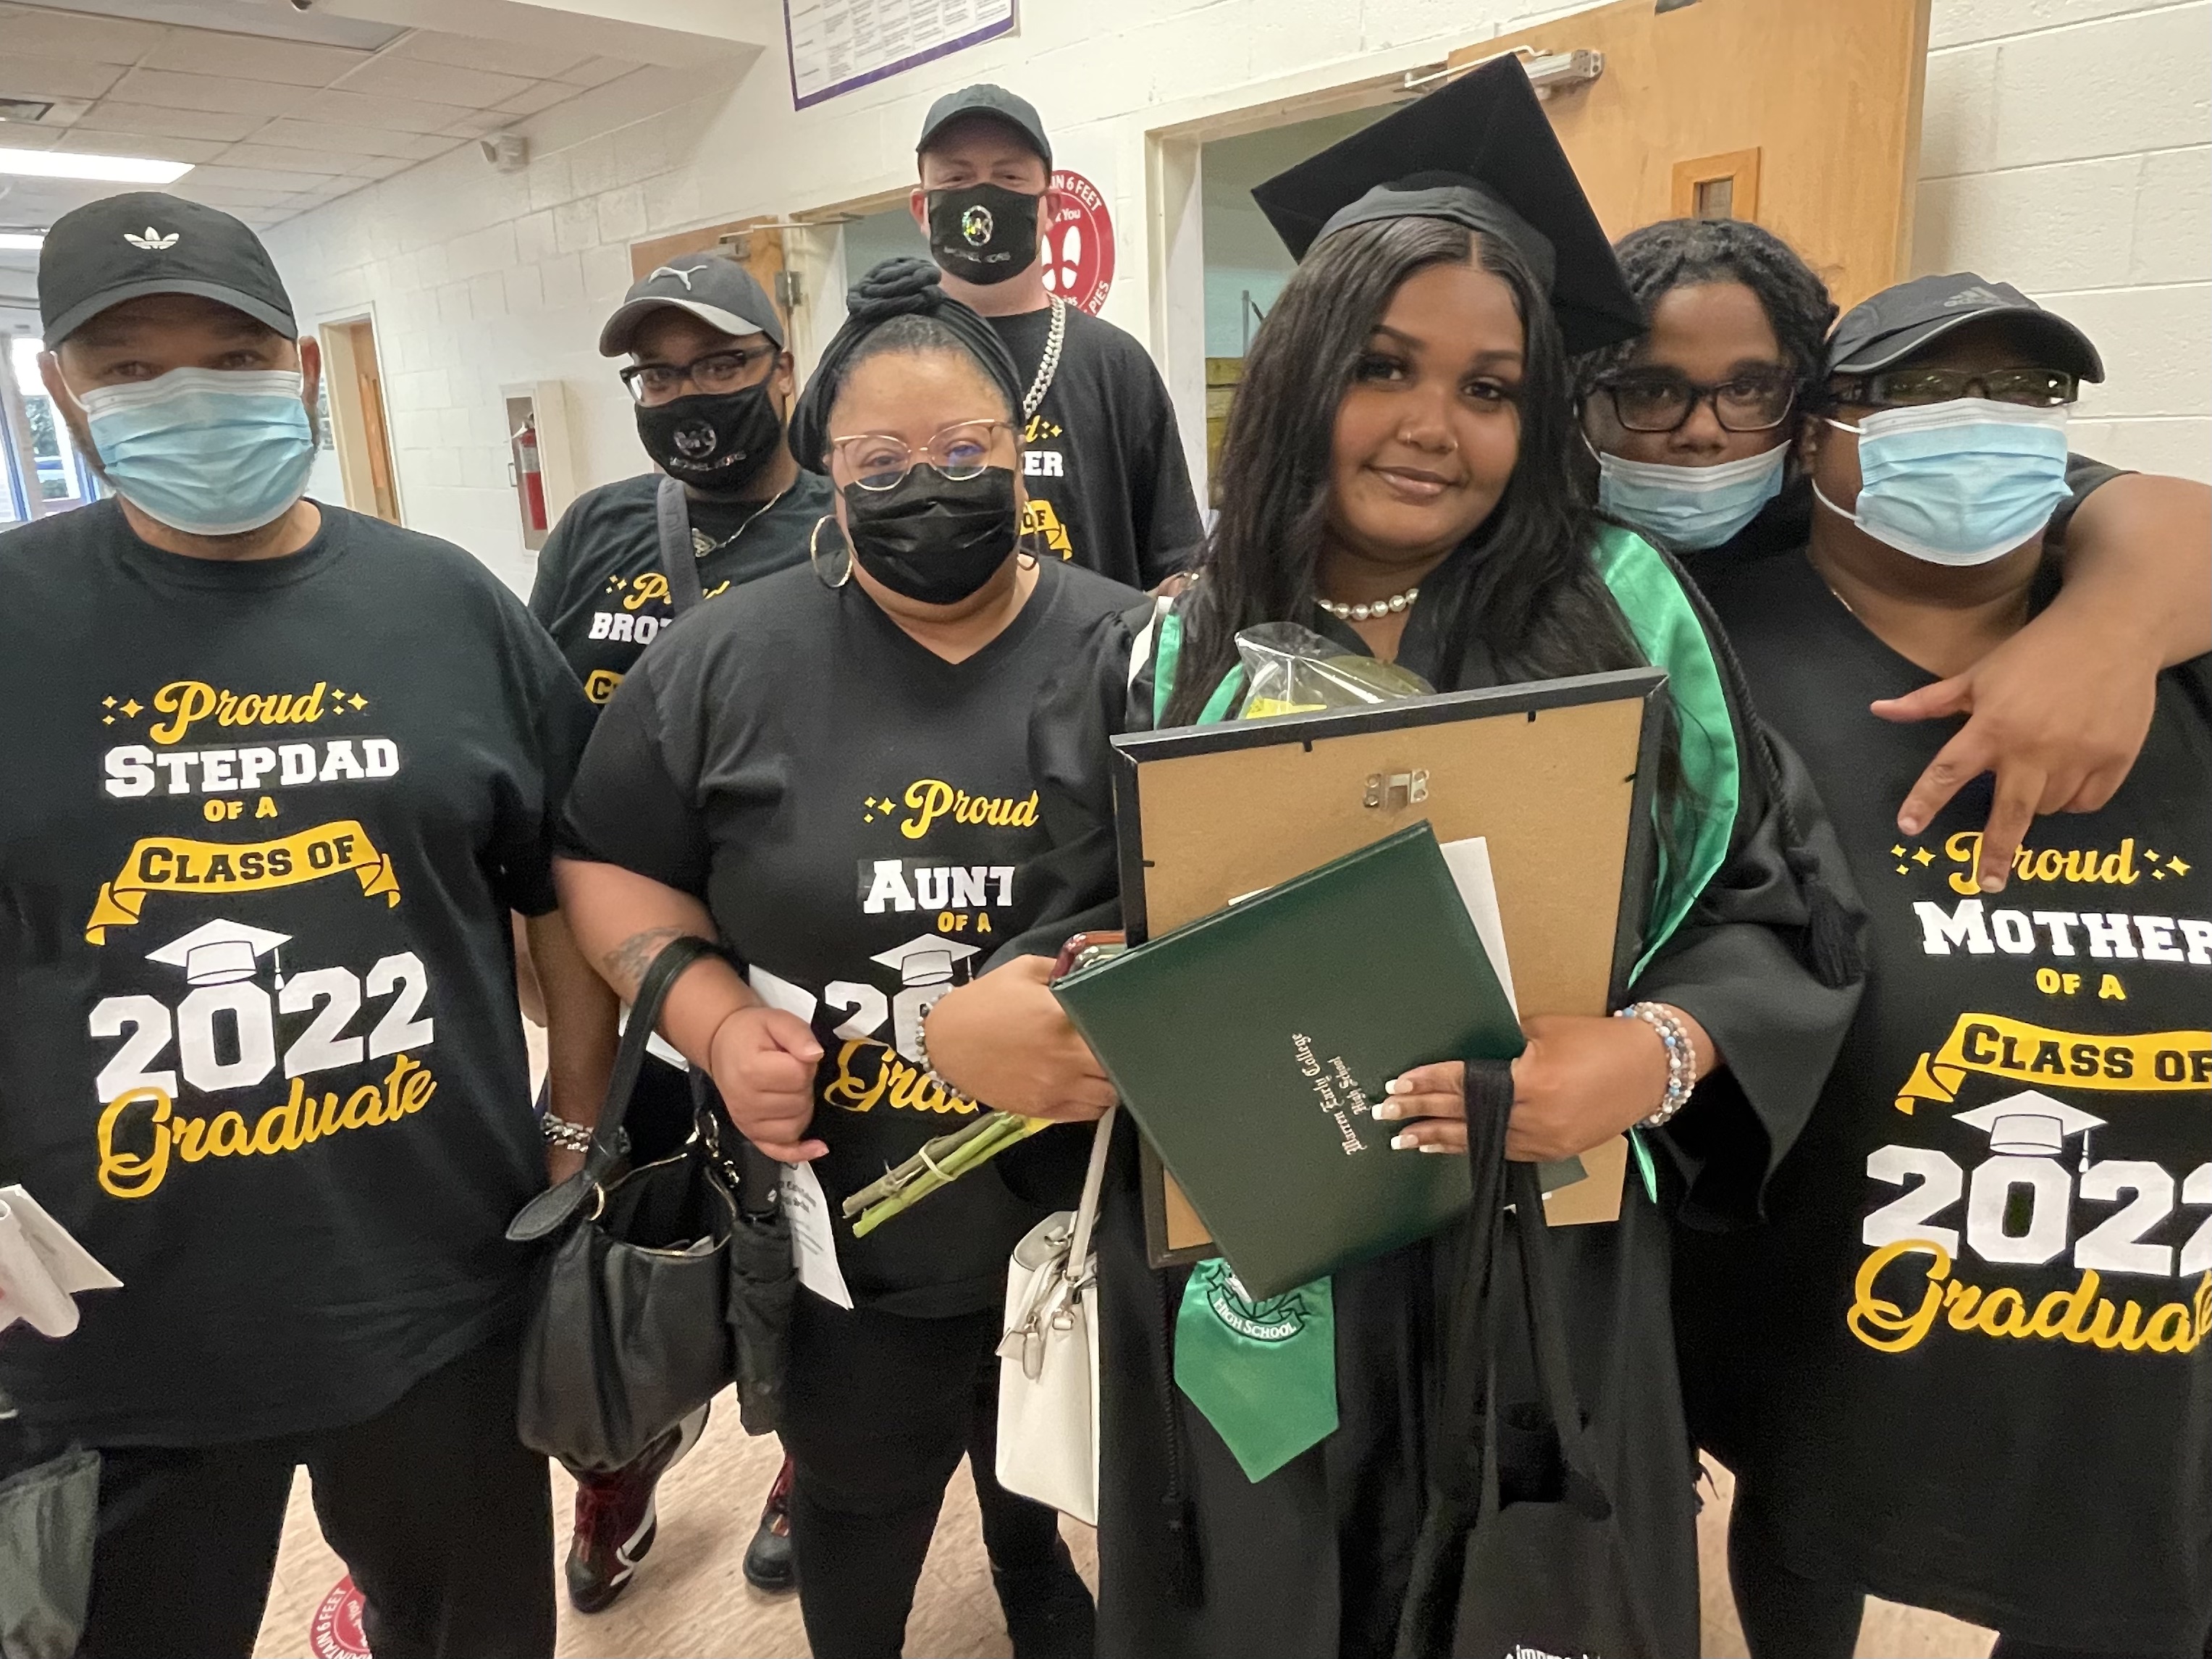 graduate surrounded by family wearing personalized shirts identifying themselves as family members of a graduate in the class of 2022